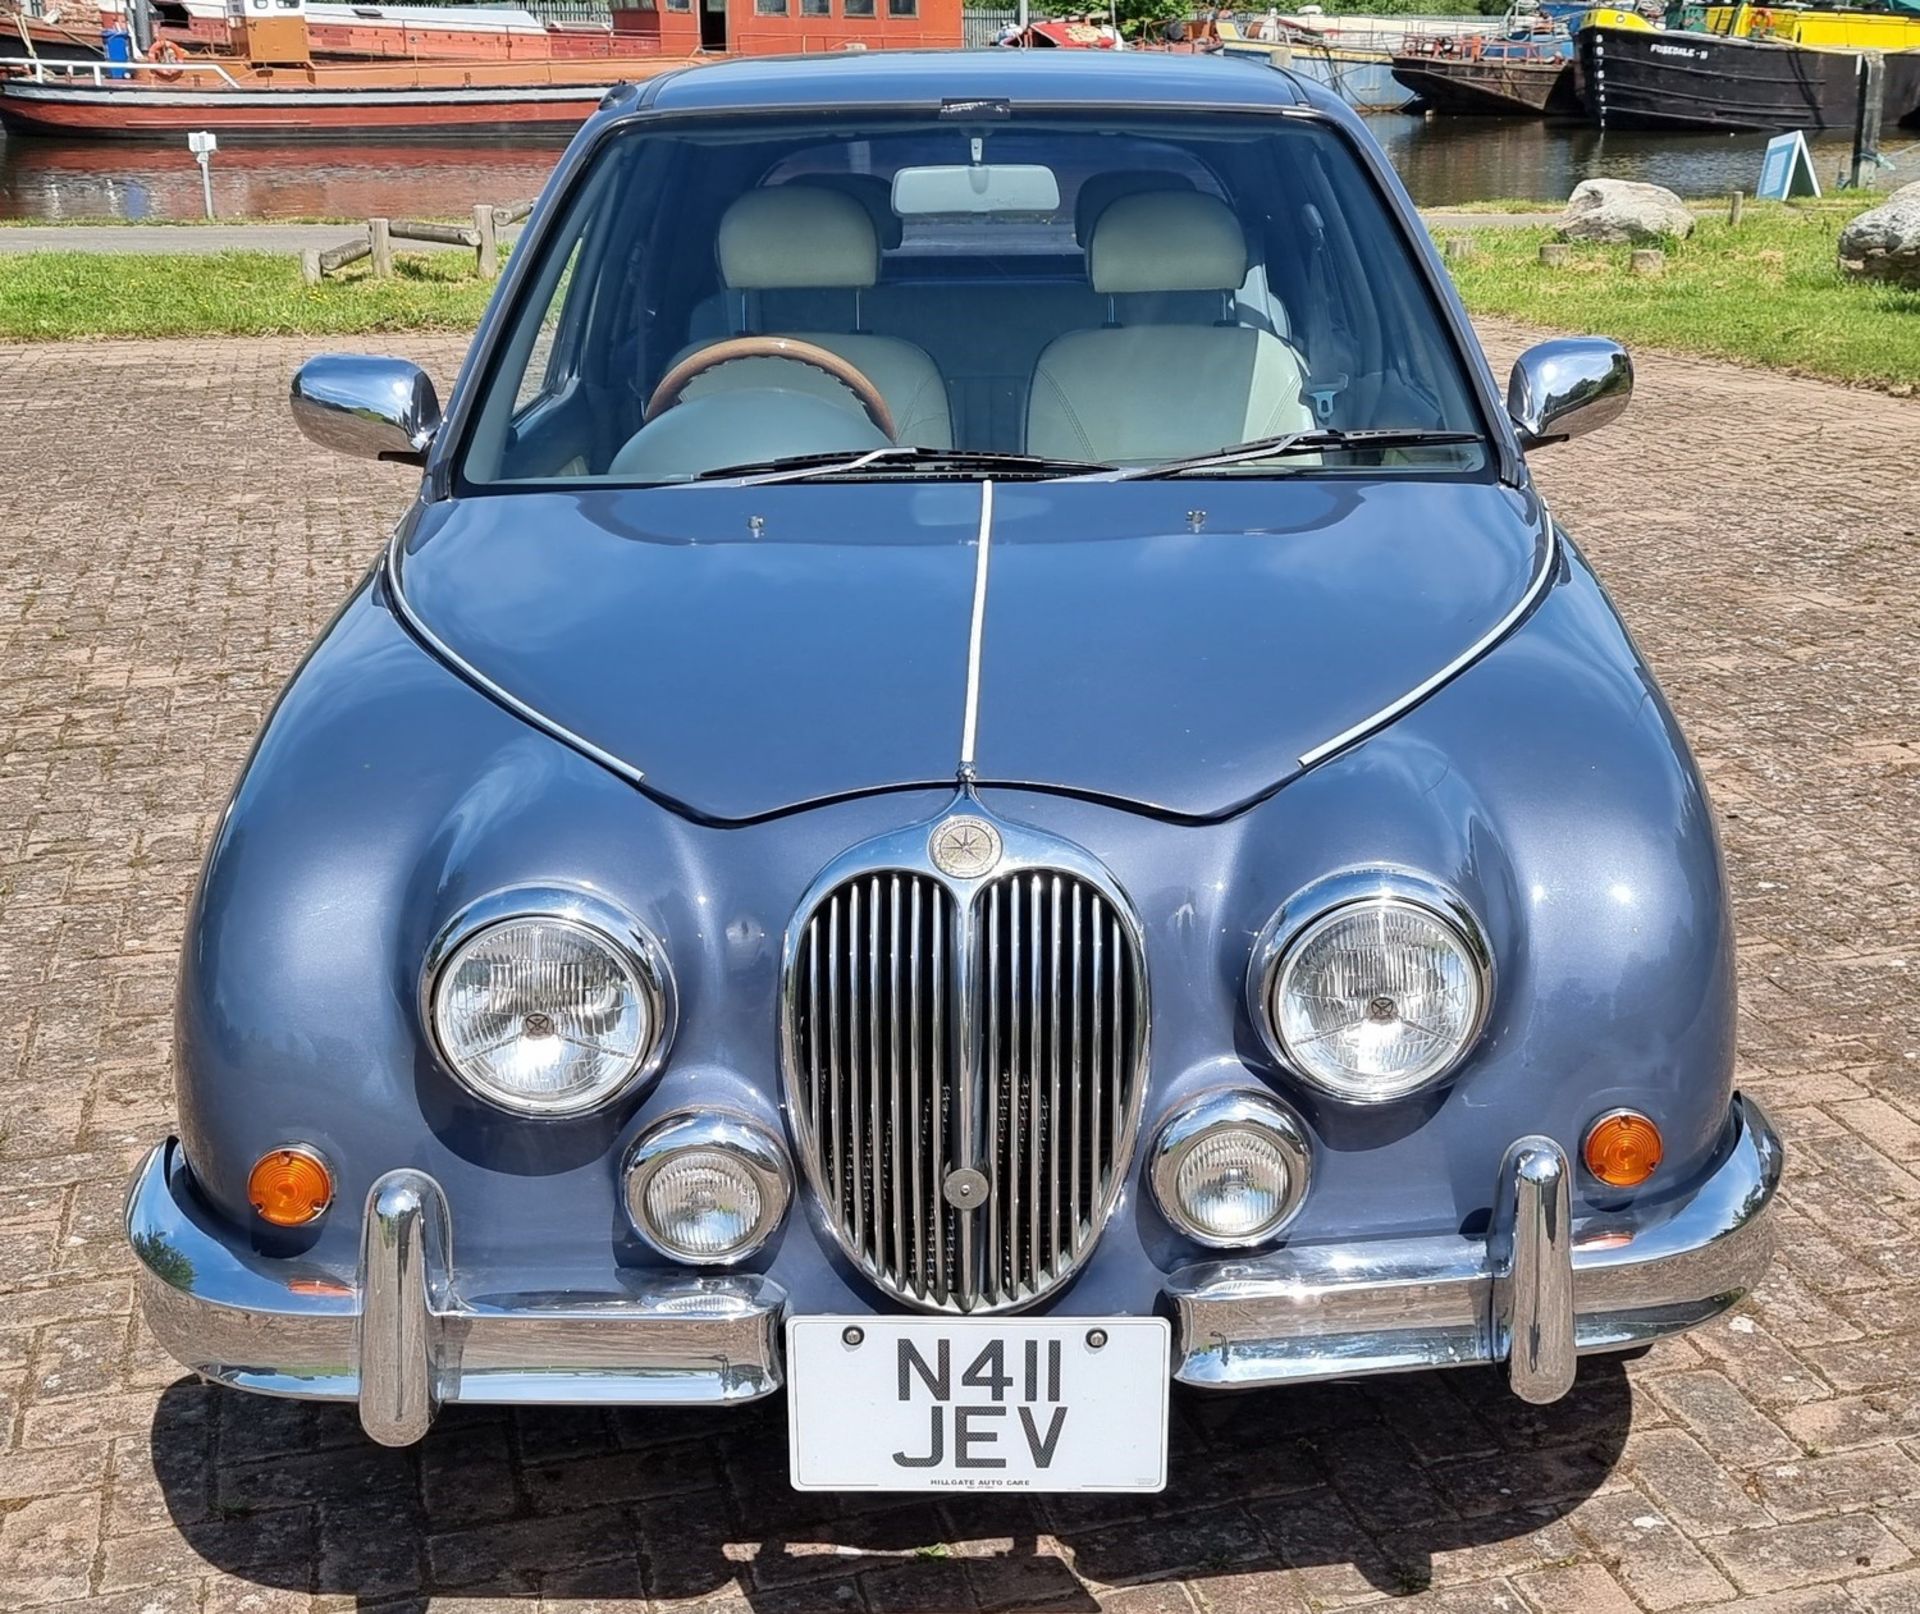 1996 Mitsuoka Viewt, 1298cc. Registration number N411 JEV. Chassis number HK11164881. Engine - Image 3 of 16